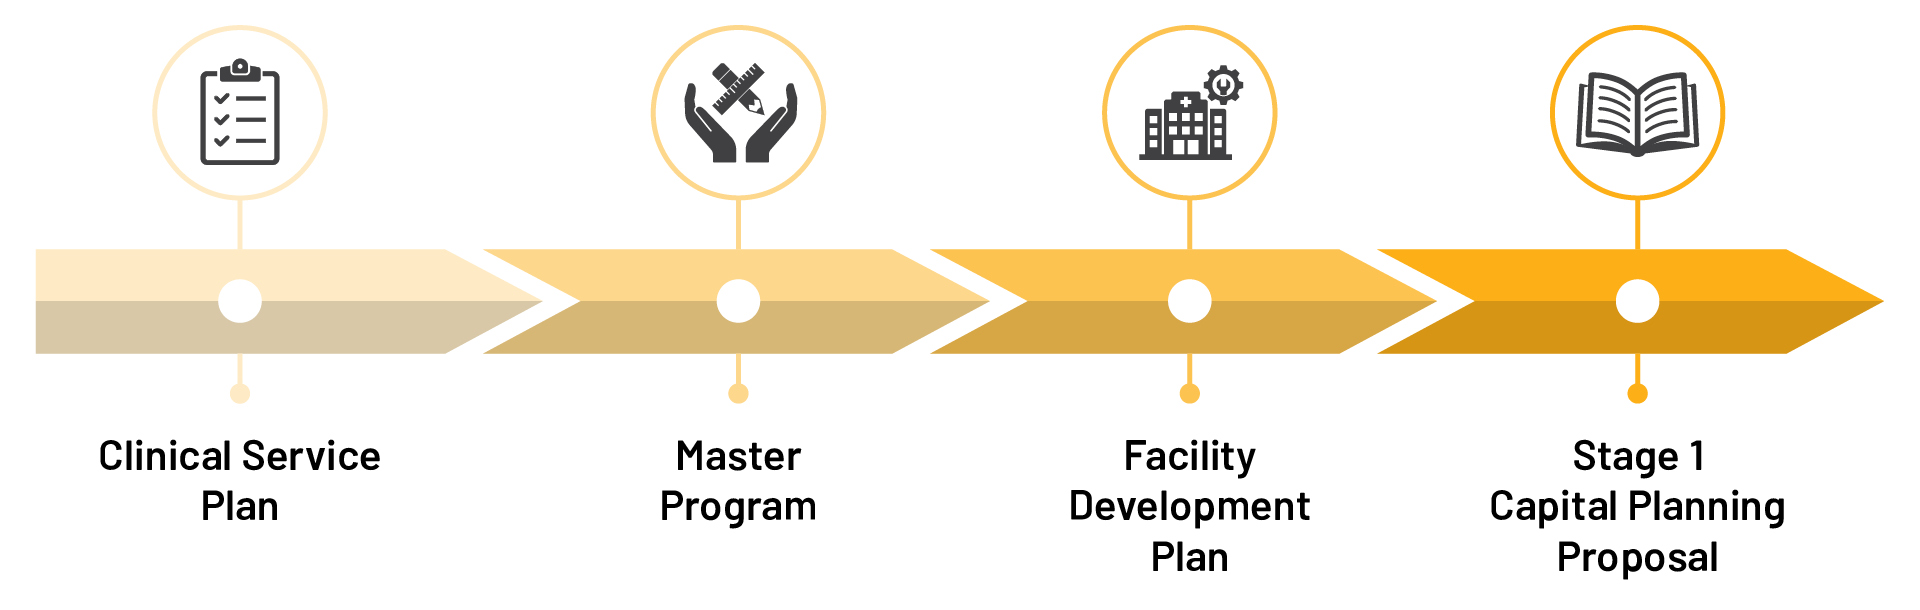 Roadmap with Icons: Clinical Service Plan, Master Program, Facility Development Plan, Stage 1 Capital Planning Proposal